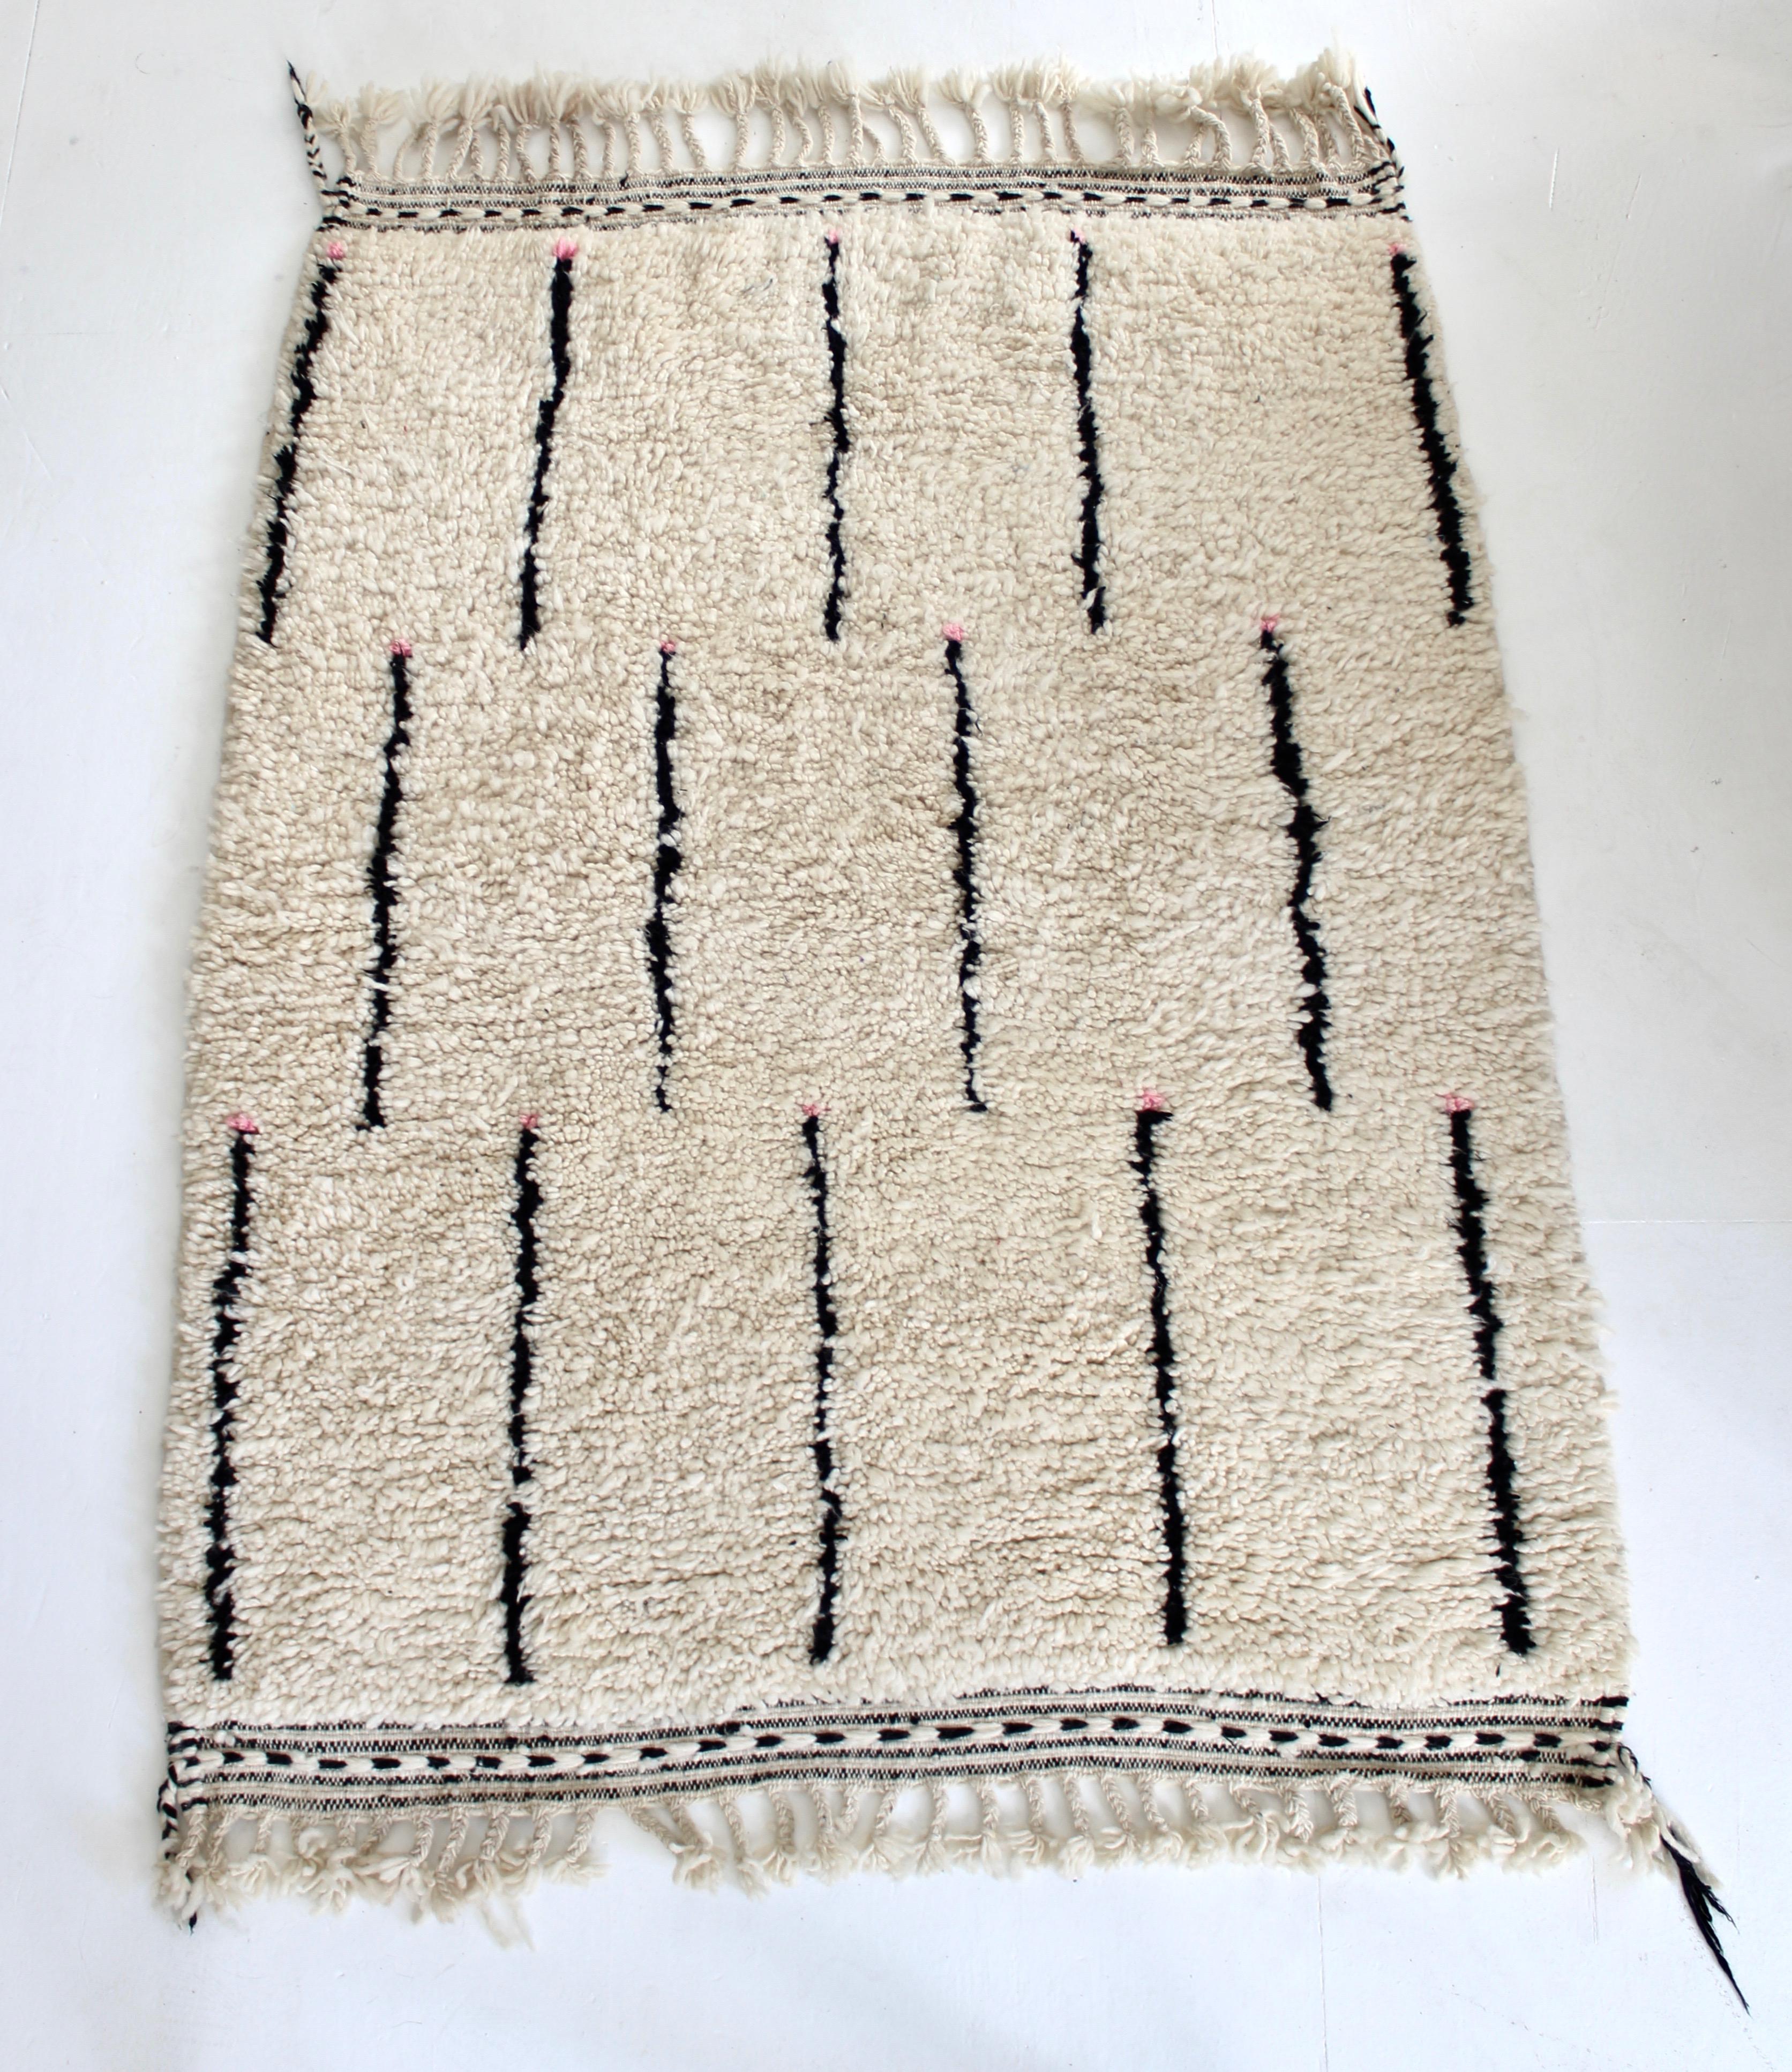 Late 20th Century Beni Ourain Moroccan Wool Cream and Black Pink Dot Atlas Mountains Rug